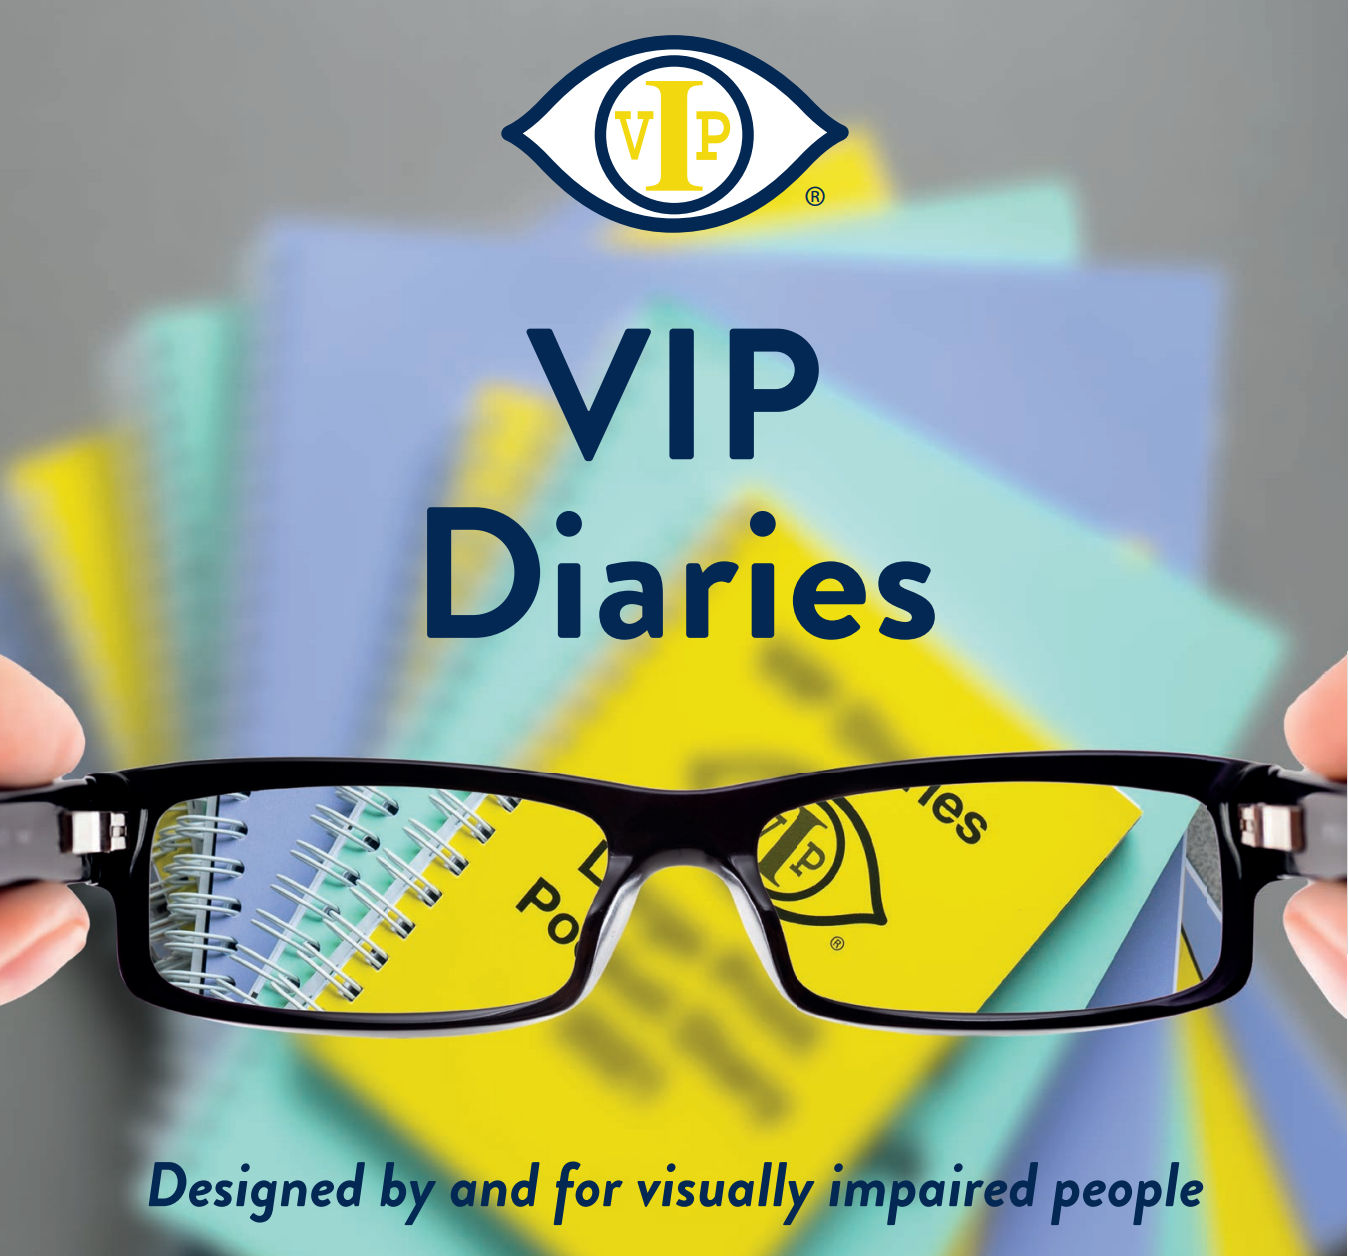 VIP Diaries Home Page Image